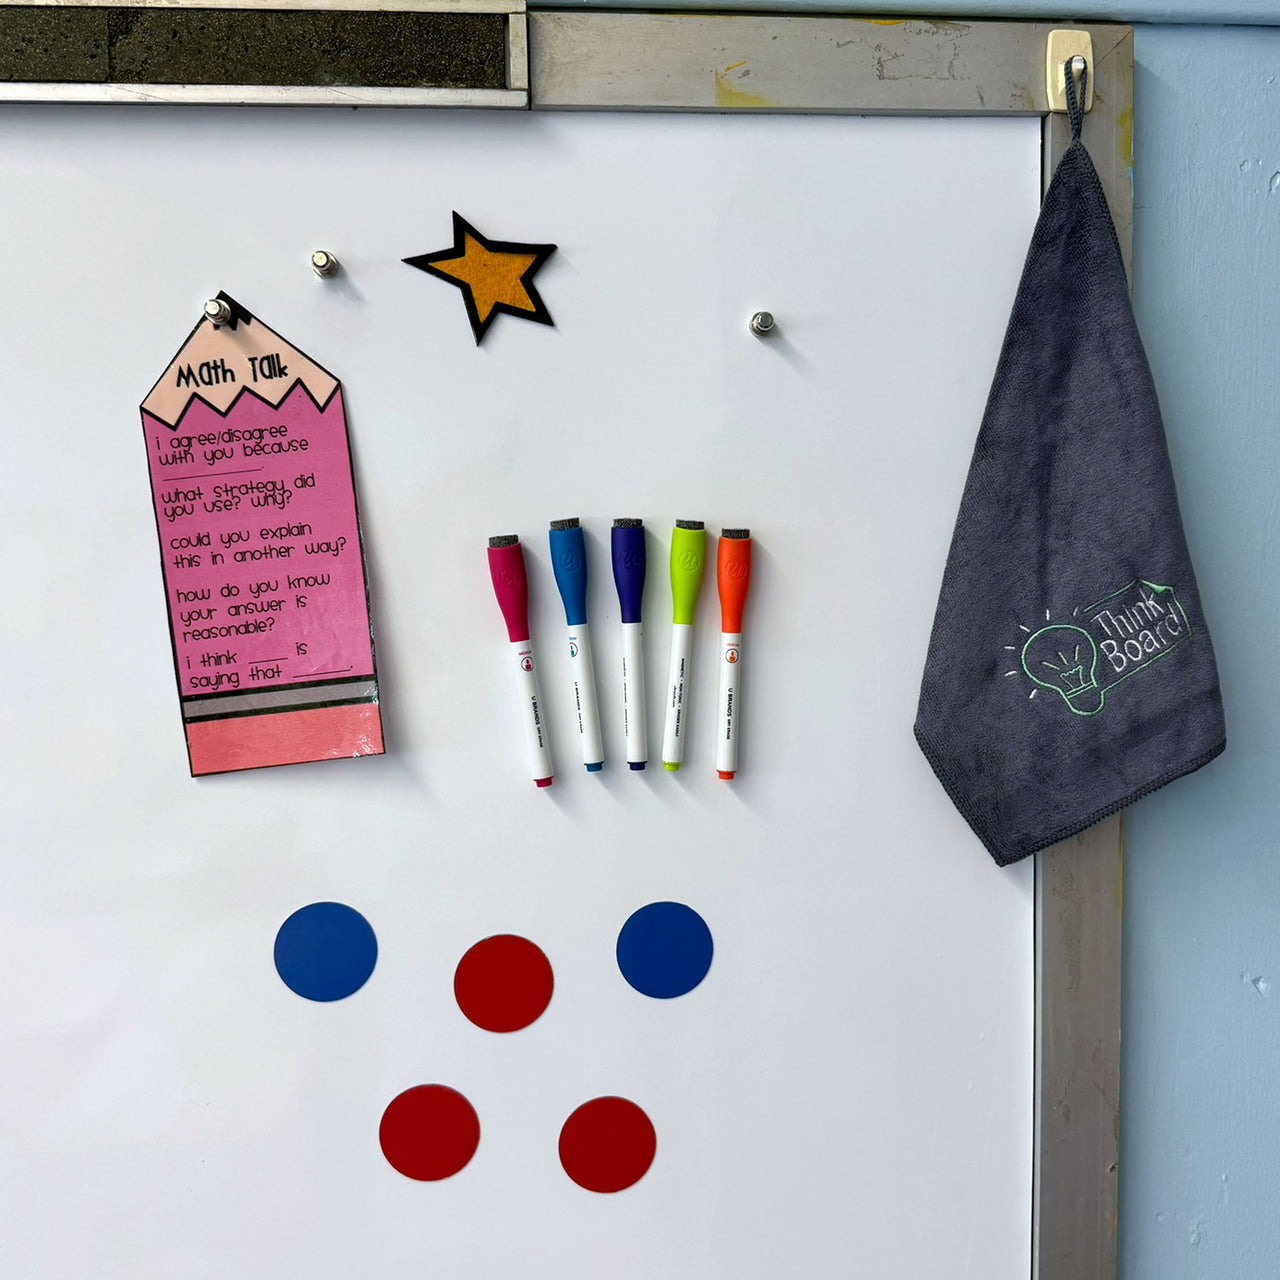 How To Make a Whiteboard Magnetic